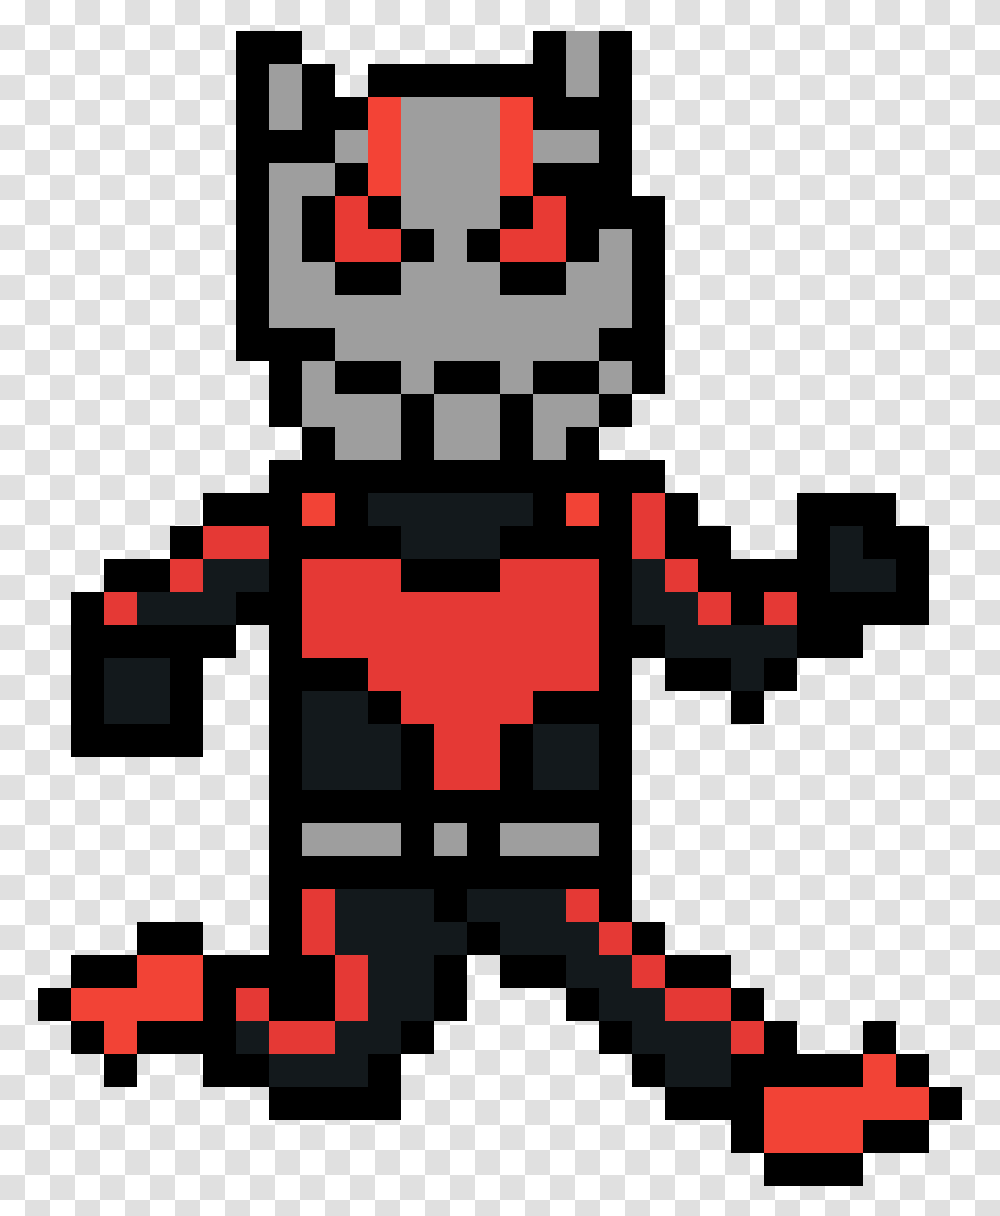 Pixilart Ant Man Run I By Pixellord12 Ant Man Animated Gif, Poster, Advertisement, Graphics, Text Transparent Png